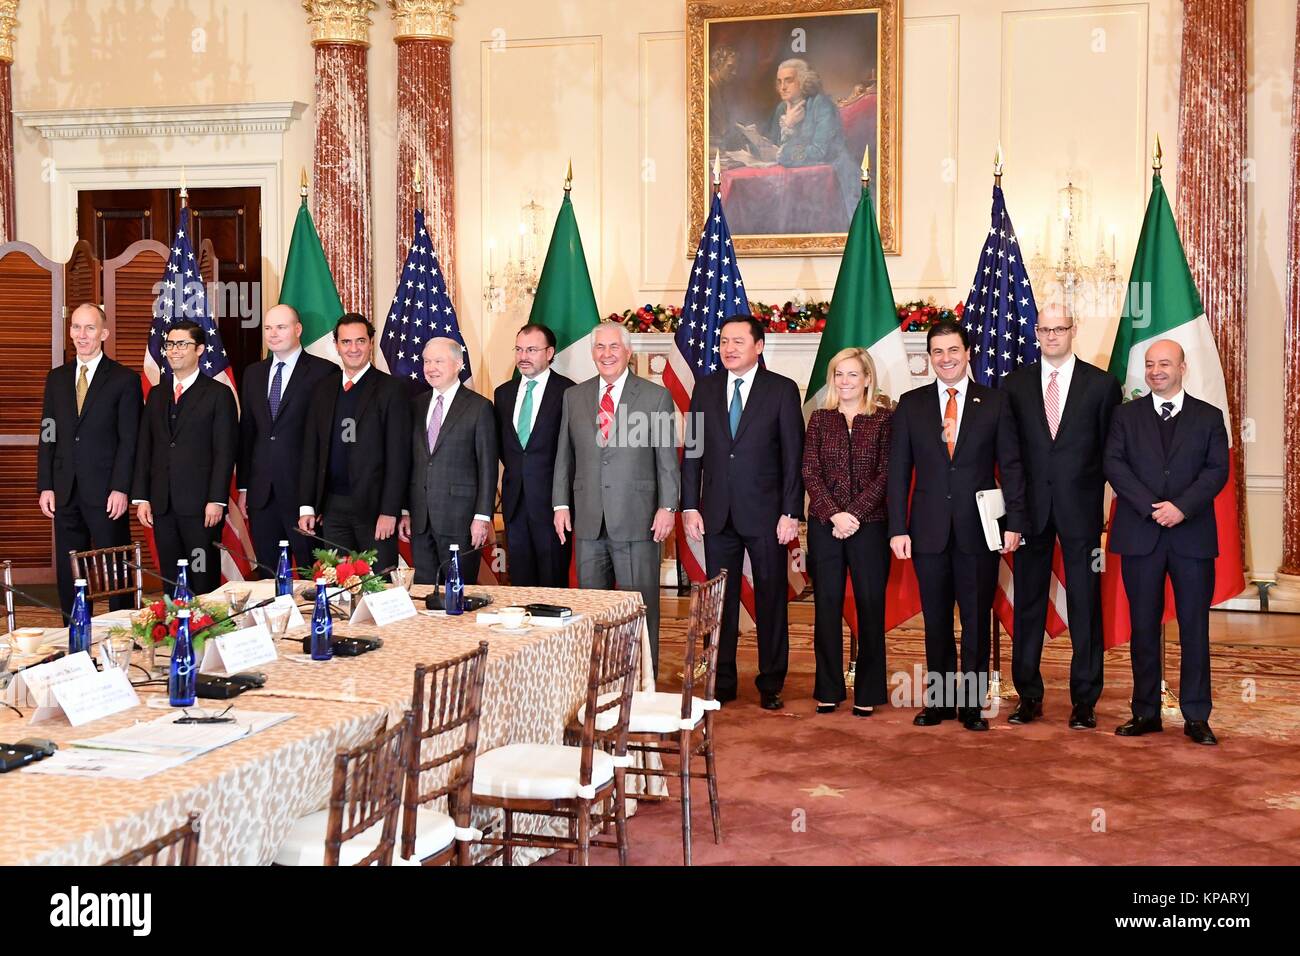 Washington DC, USA. 14th Dec, 2017. U.S. and Mexican officials stand for a group photo before the start of the Second U.S.-Mexico Strategic Dialogue on Disrupting Transnational Criminal Organizations at the State Department December 14, 2017 in Washington, D.C. Included at the meeting are Homeland Security Secretary Kirstjen Nielsen, Attorney General Jeff Sessions and their Mexican counterparts, Foreign Secretary Luis Videgaray, Secretary of Government Miguel Osorio, and Acting Attorney General Elias Beltran. Credit: Planetpix/Alamy Live News Stock Photo